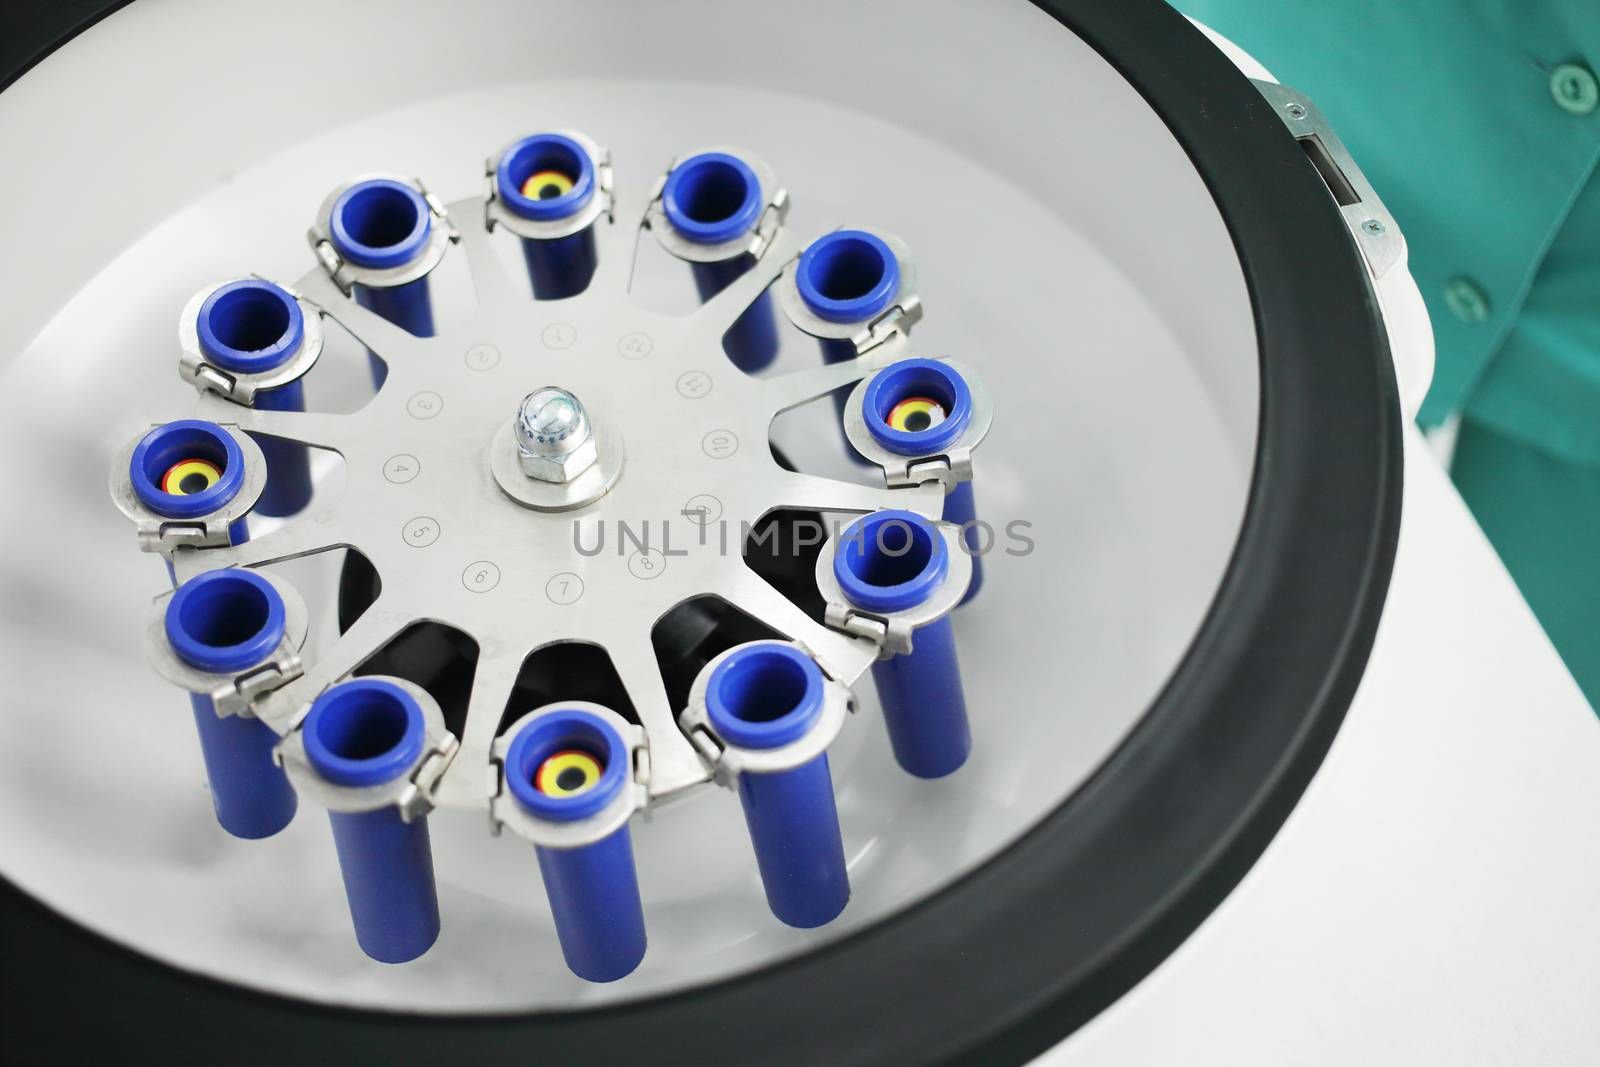 Laboratory medical centrifuge for the separation of blood components. High quality photo